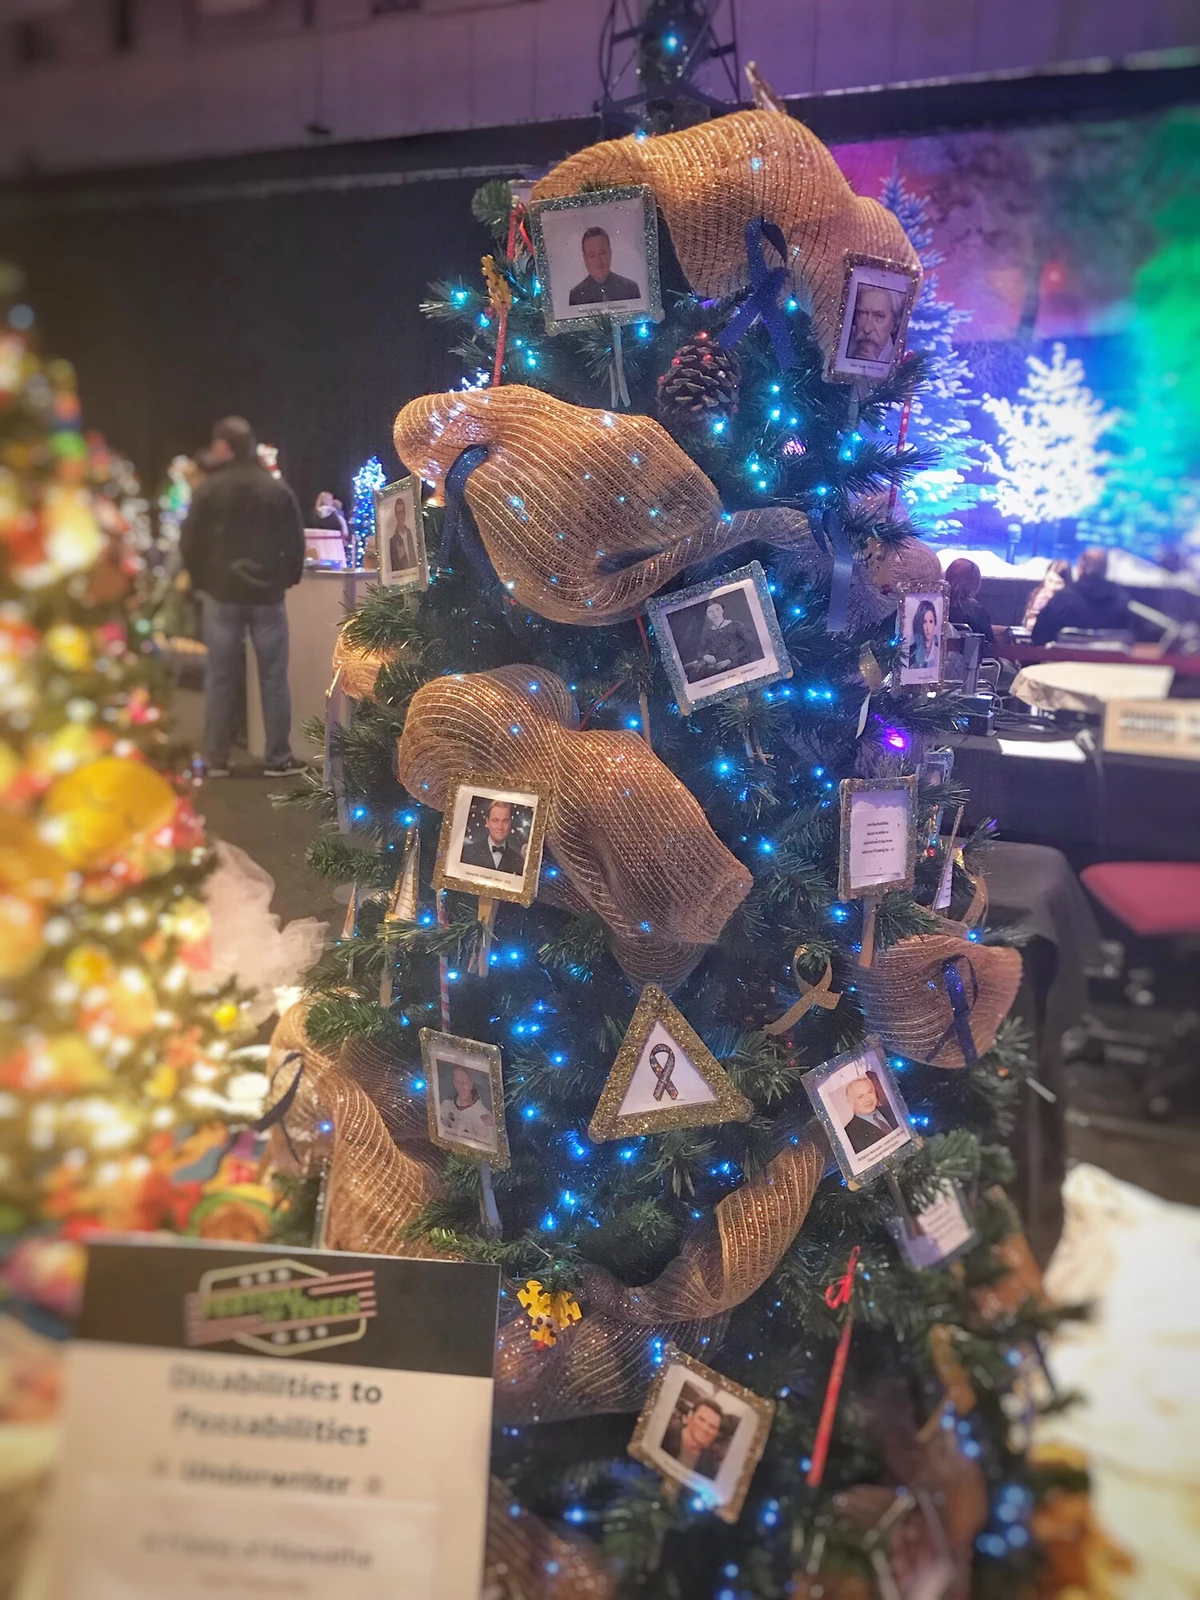 The Most Important Christmas Tree At 'Festival Of Trees'